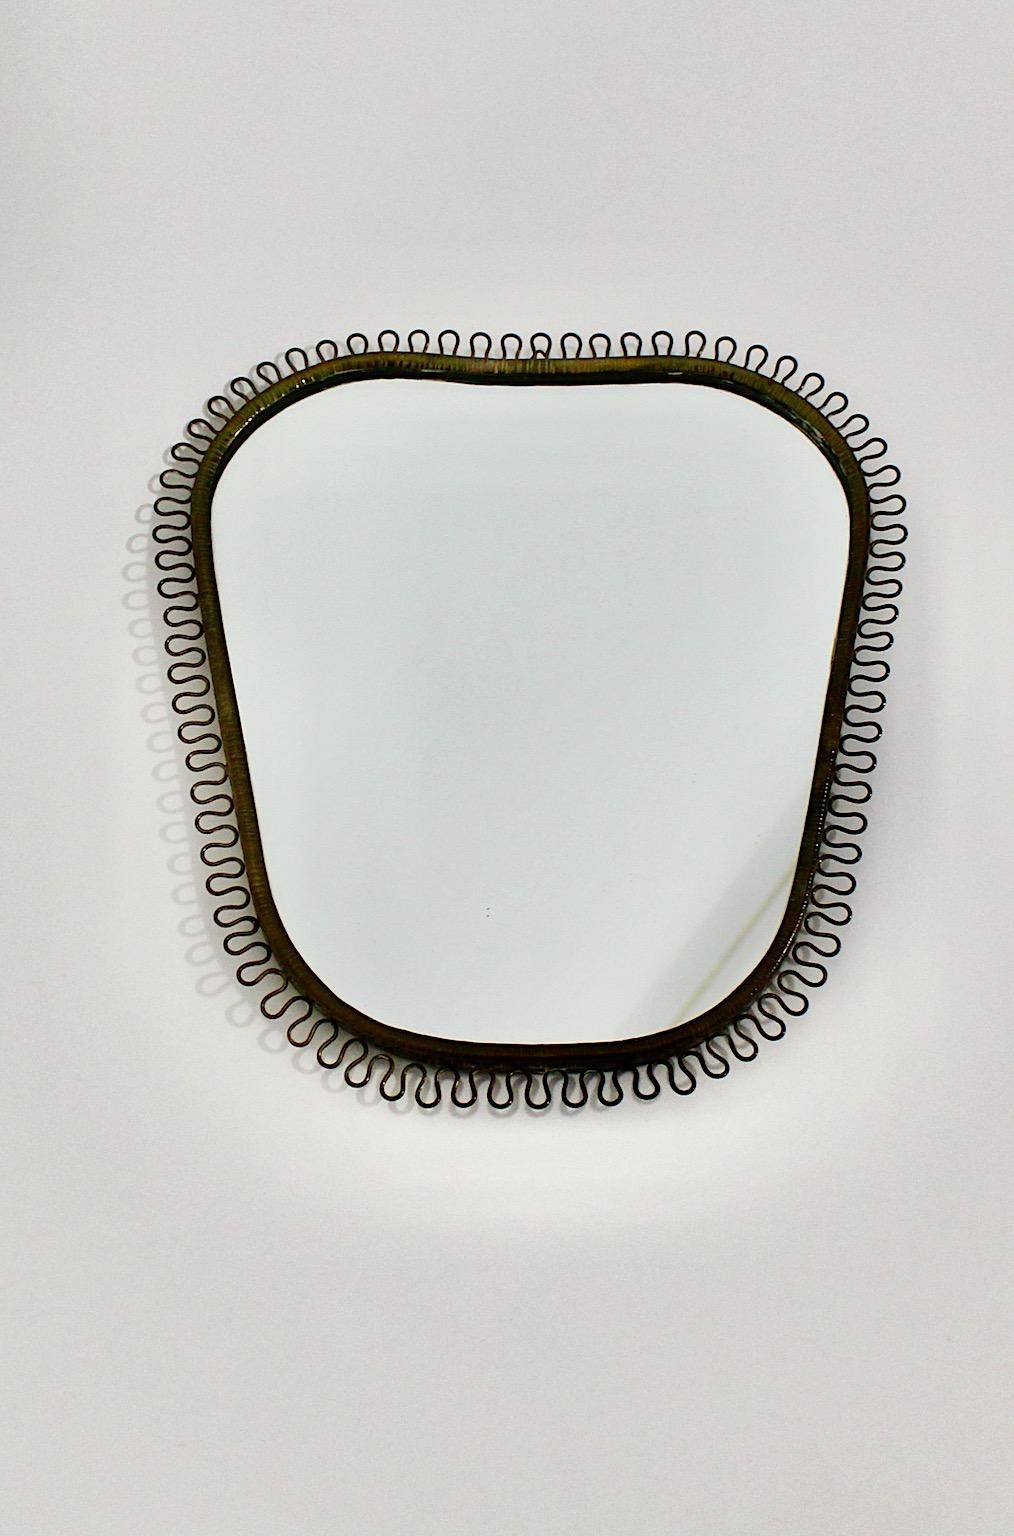 Josef Frank vintage loop wall mirror heart like for Svenskt Tenn 1950s Sweden.
The wall mirror shows cute solid brass loops at the frame heart like shape partly blackened through the age, the mirror glass shows nice mirror patina as well.
Backside